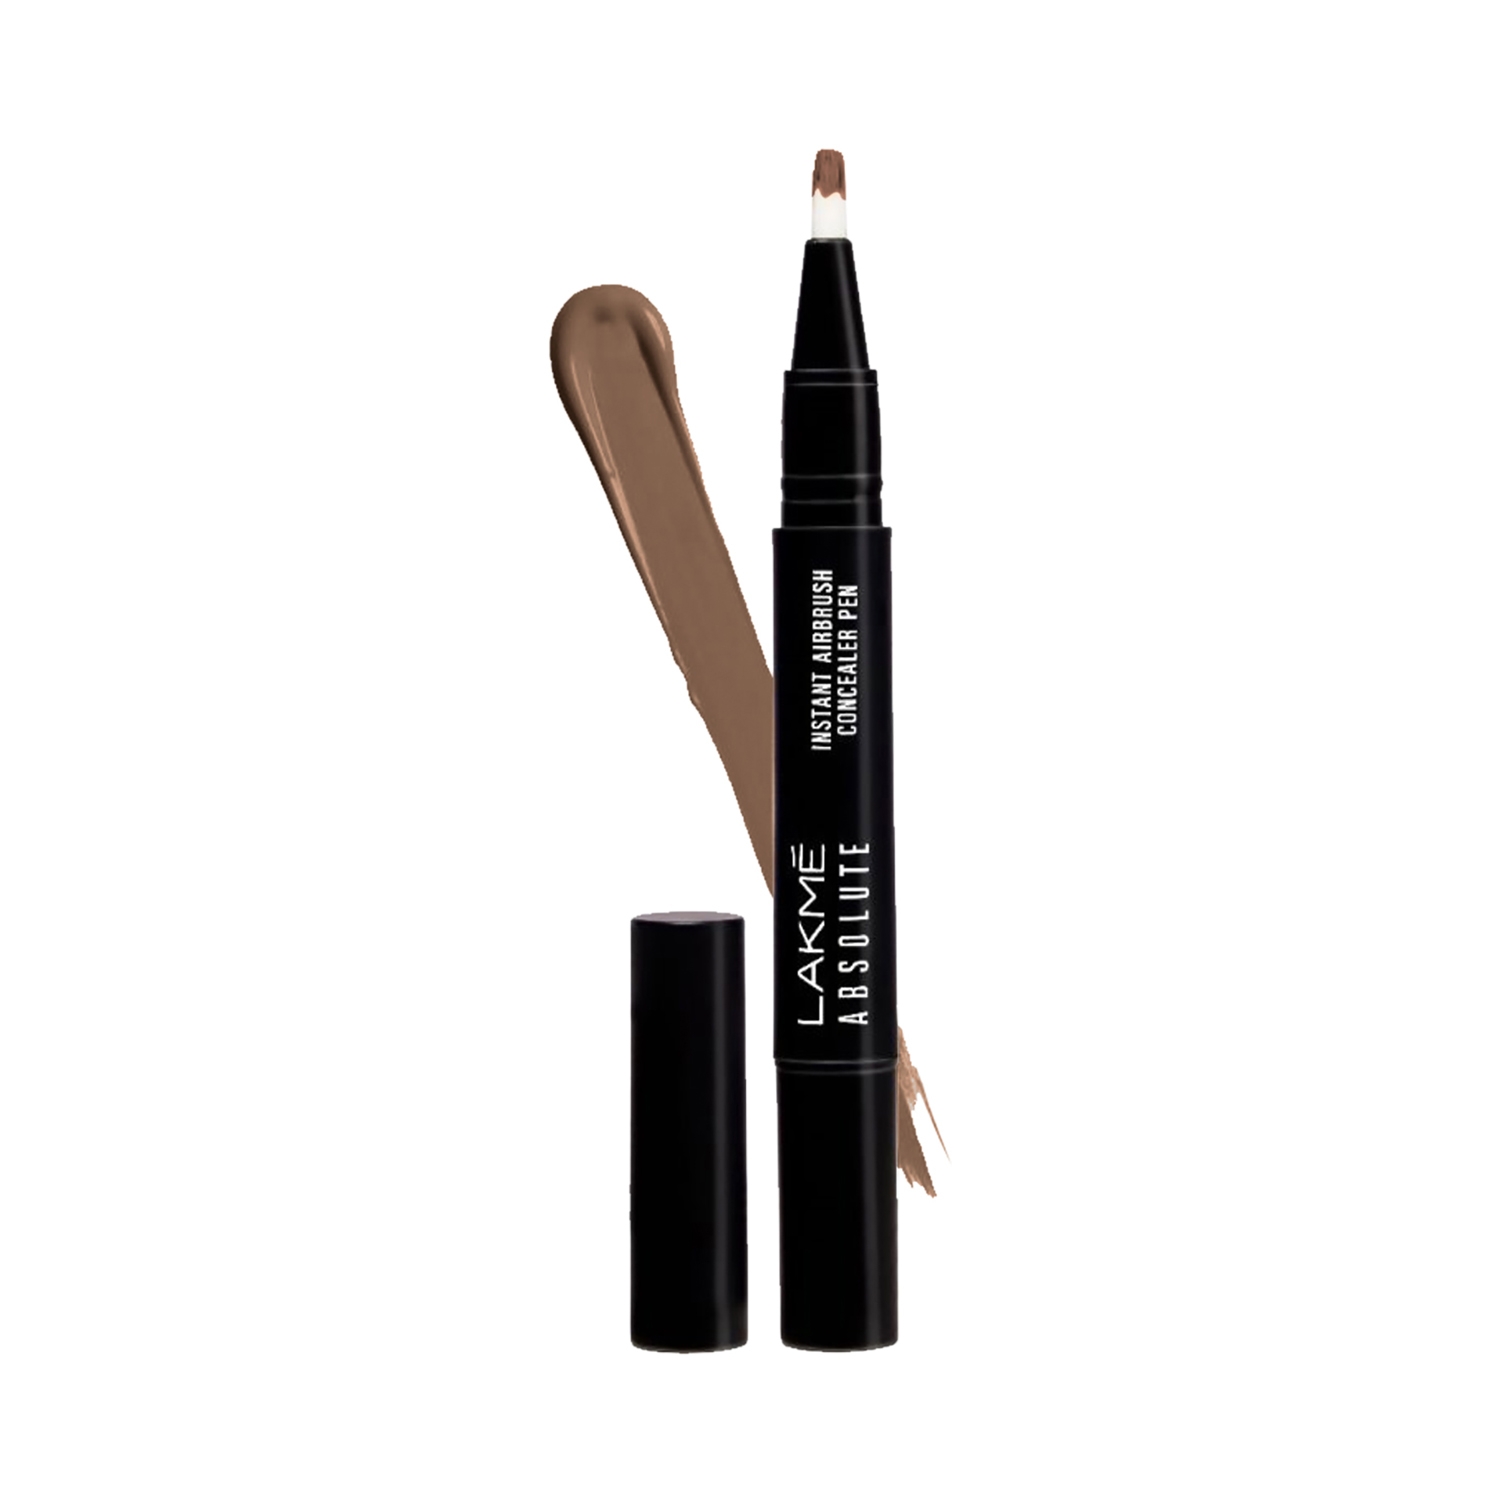 Lakme | Lakme Absolute Instant Airbrush Concealer Pen - Cocoa (1.8g)